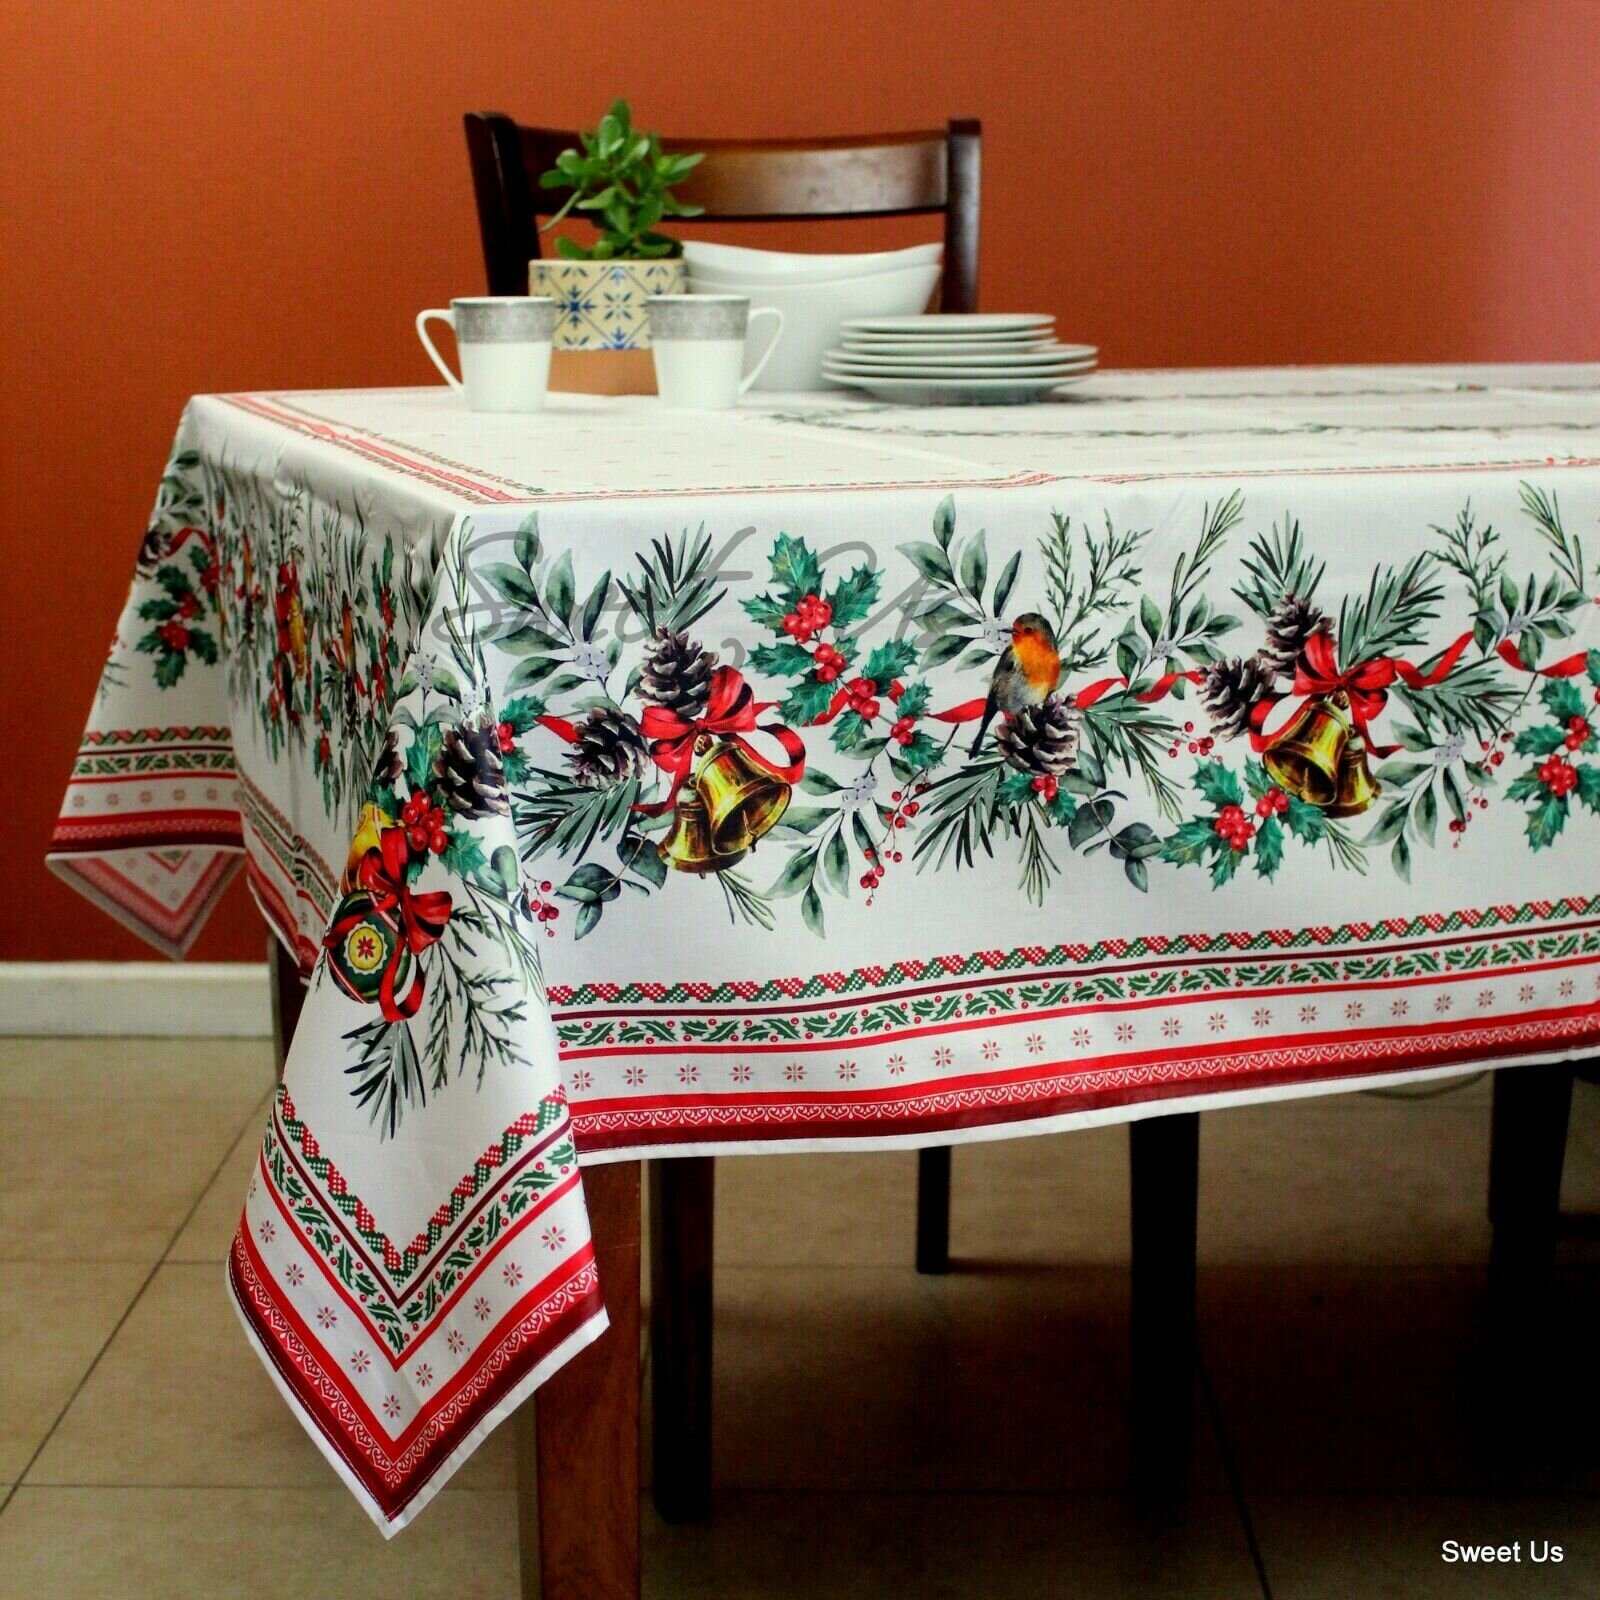 50cmx140cm Christmas Decoration Table Runner Panel Fabric Kitchen Tablerunner Sewing Tablecloth Decor Christmas bell Xmas Decor